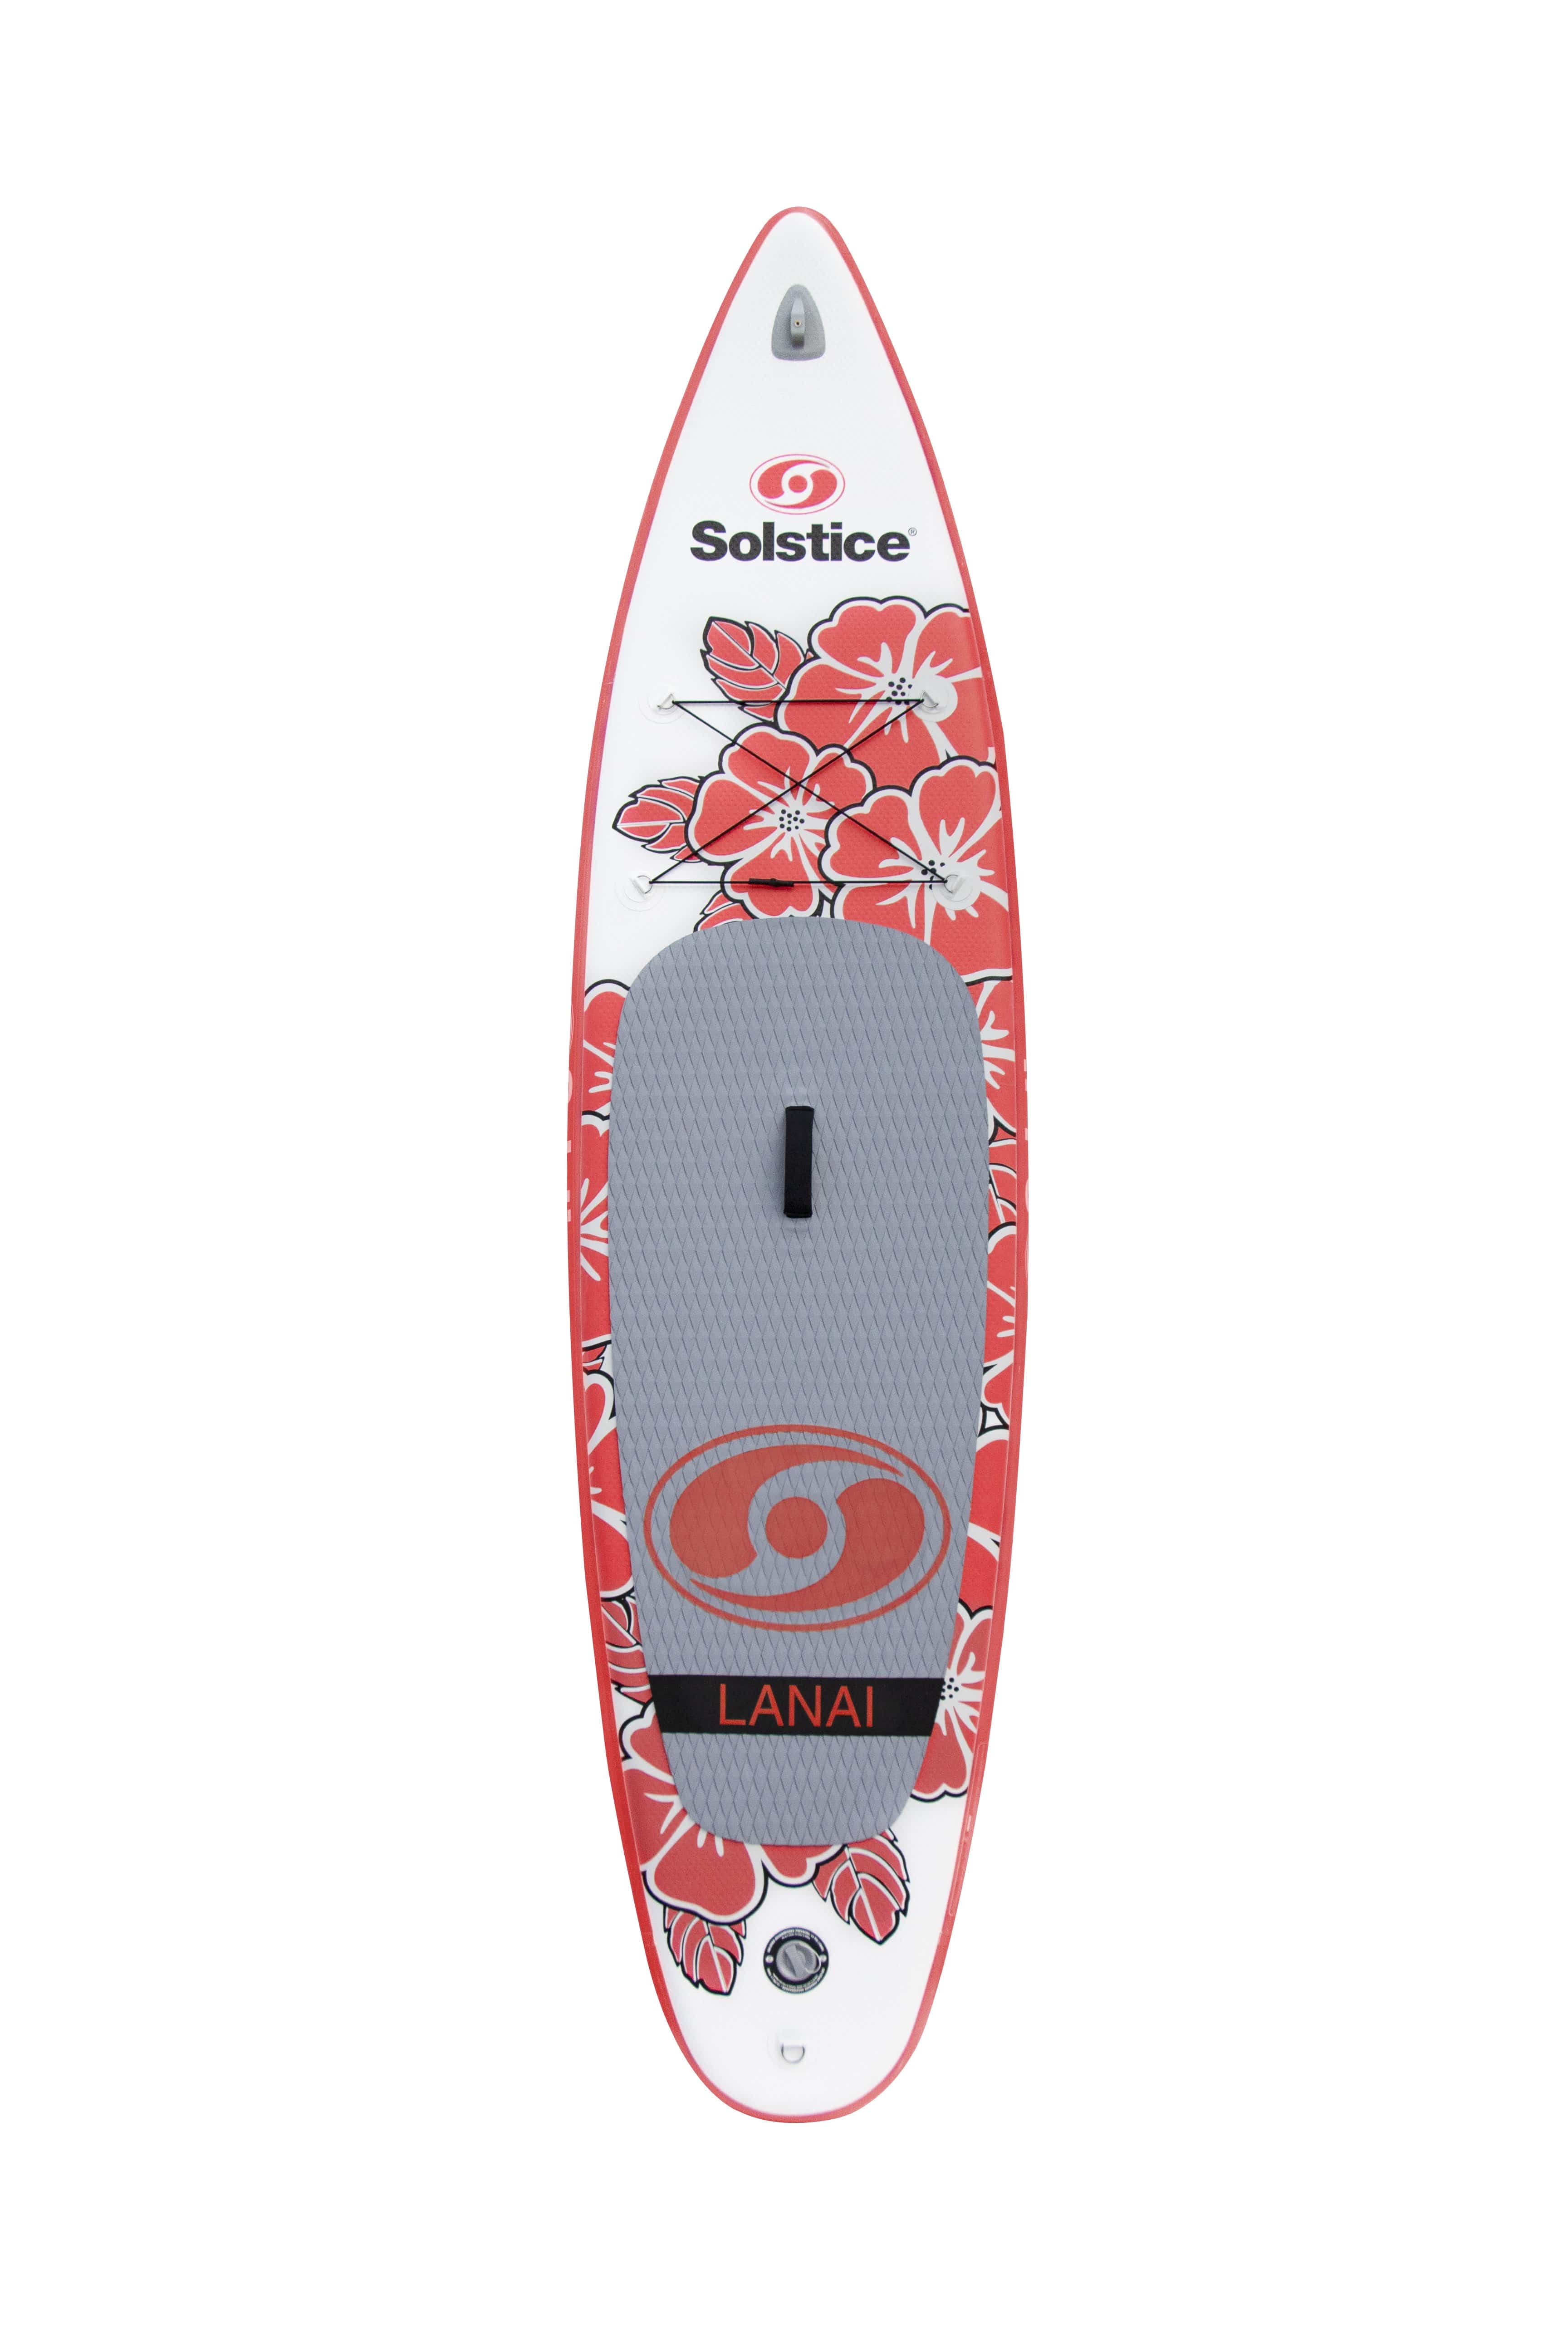 solstice inflatable sup, solstice bali sup, , best inflatable sup usa, best inflatable kayak usa, best inflatable paddleboards in usa, what is the best inflatable sup, what is the best inflatable sup board, sup board,sup inflatable, sup inflatable paddle board,sup inflatable pump,sup inflatable America,sup inflatable reviews,sup inflatable usa,sup inflatable sale,best sup inflatable,starboard sup inflatable,body ,sup boards inflatable,sup reviews inflatable,sups inflatable, stand up paddle board